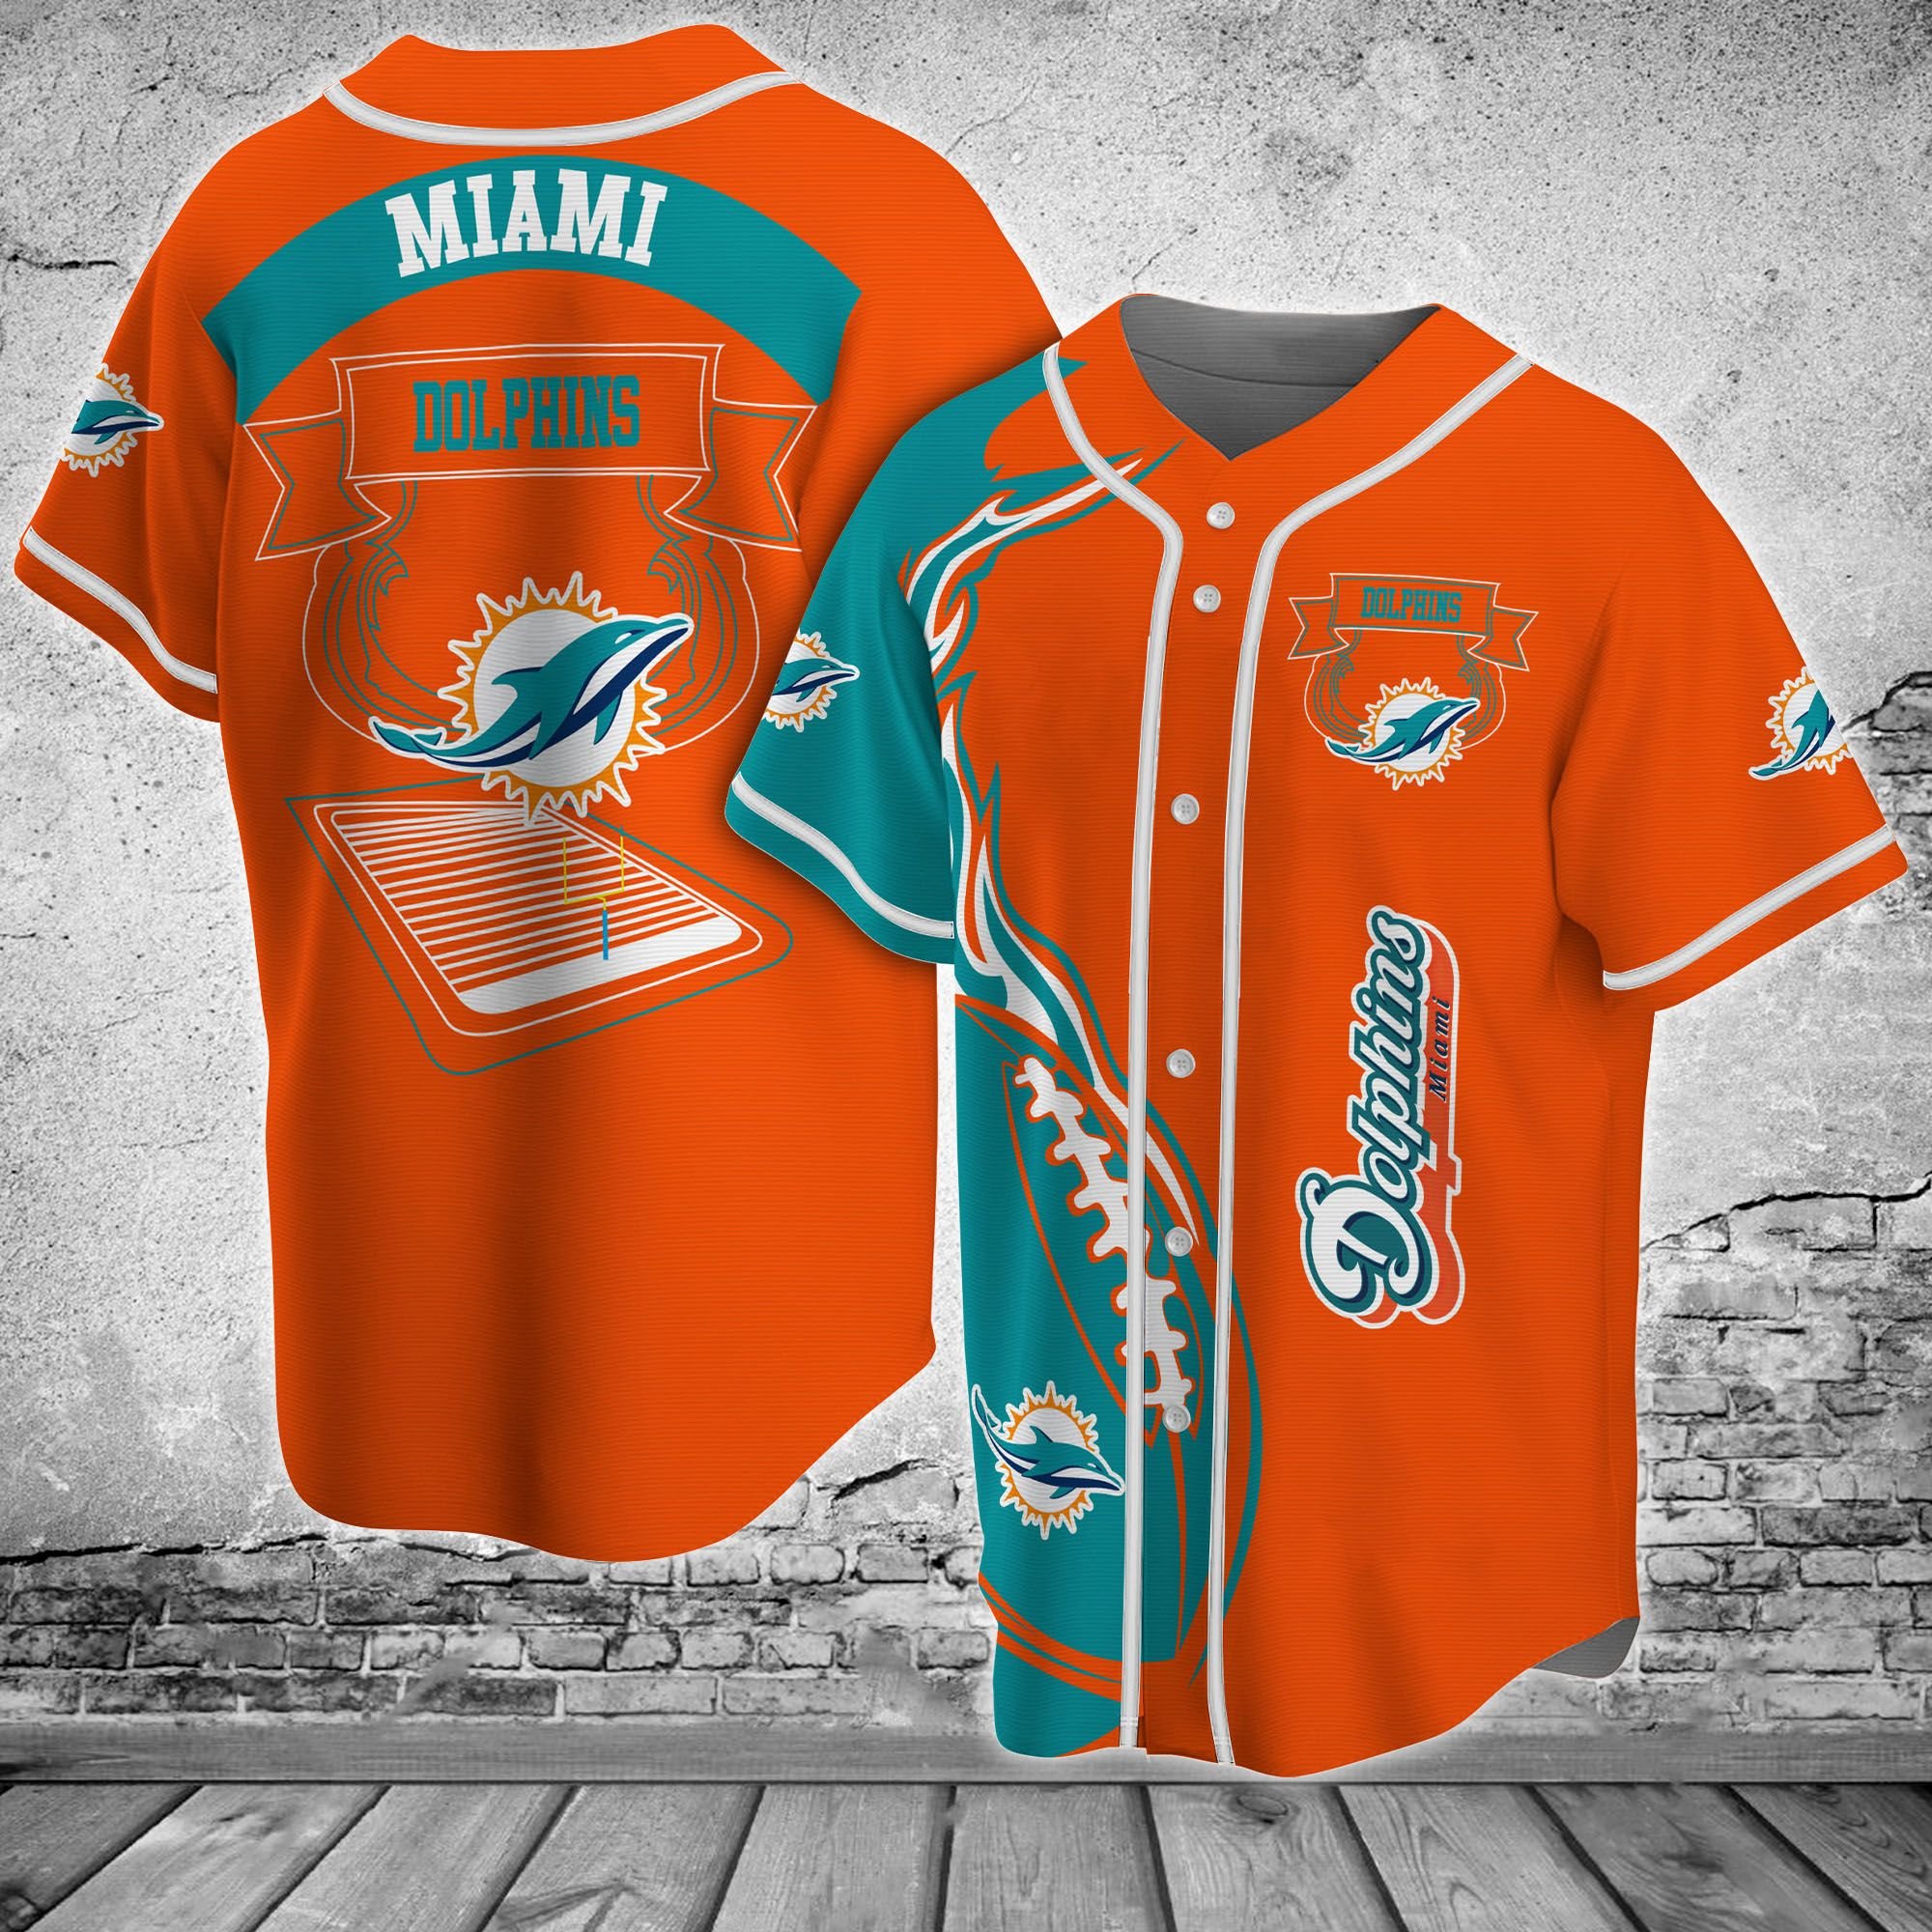 Miami Dolphins Shop - miami dolphins nfl baseball jersey shirt 3d92204